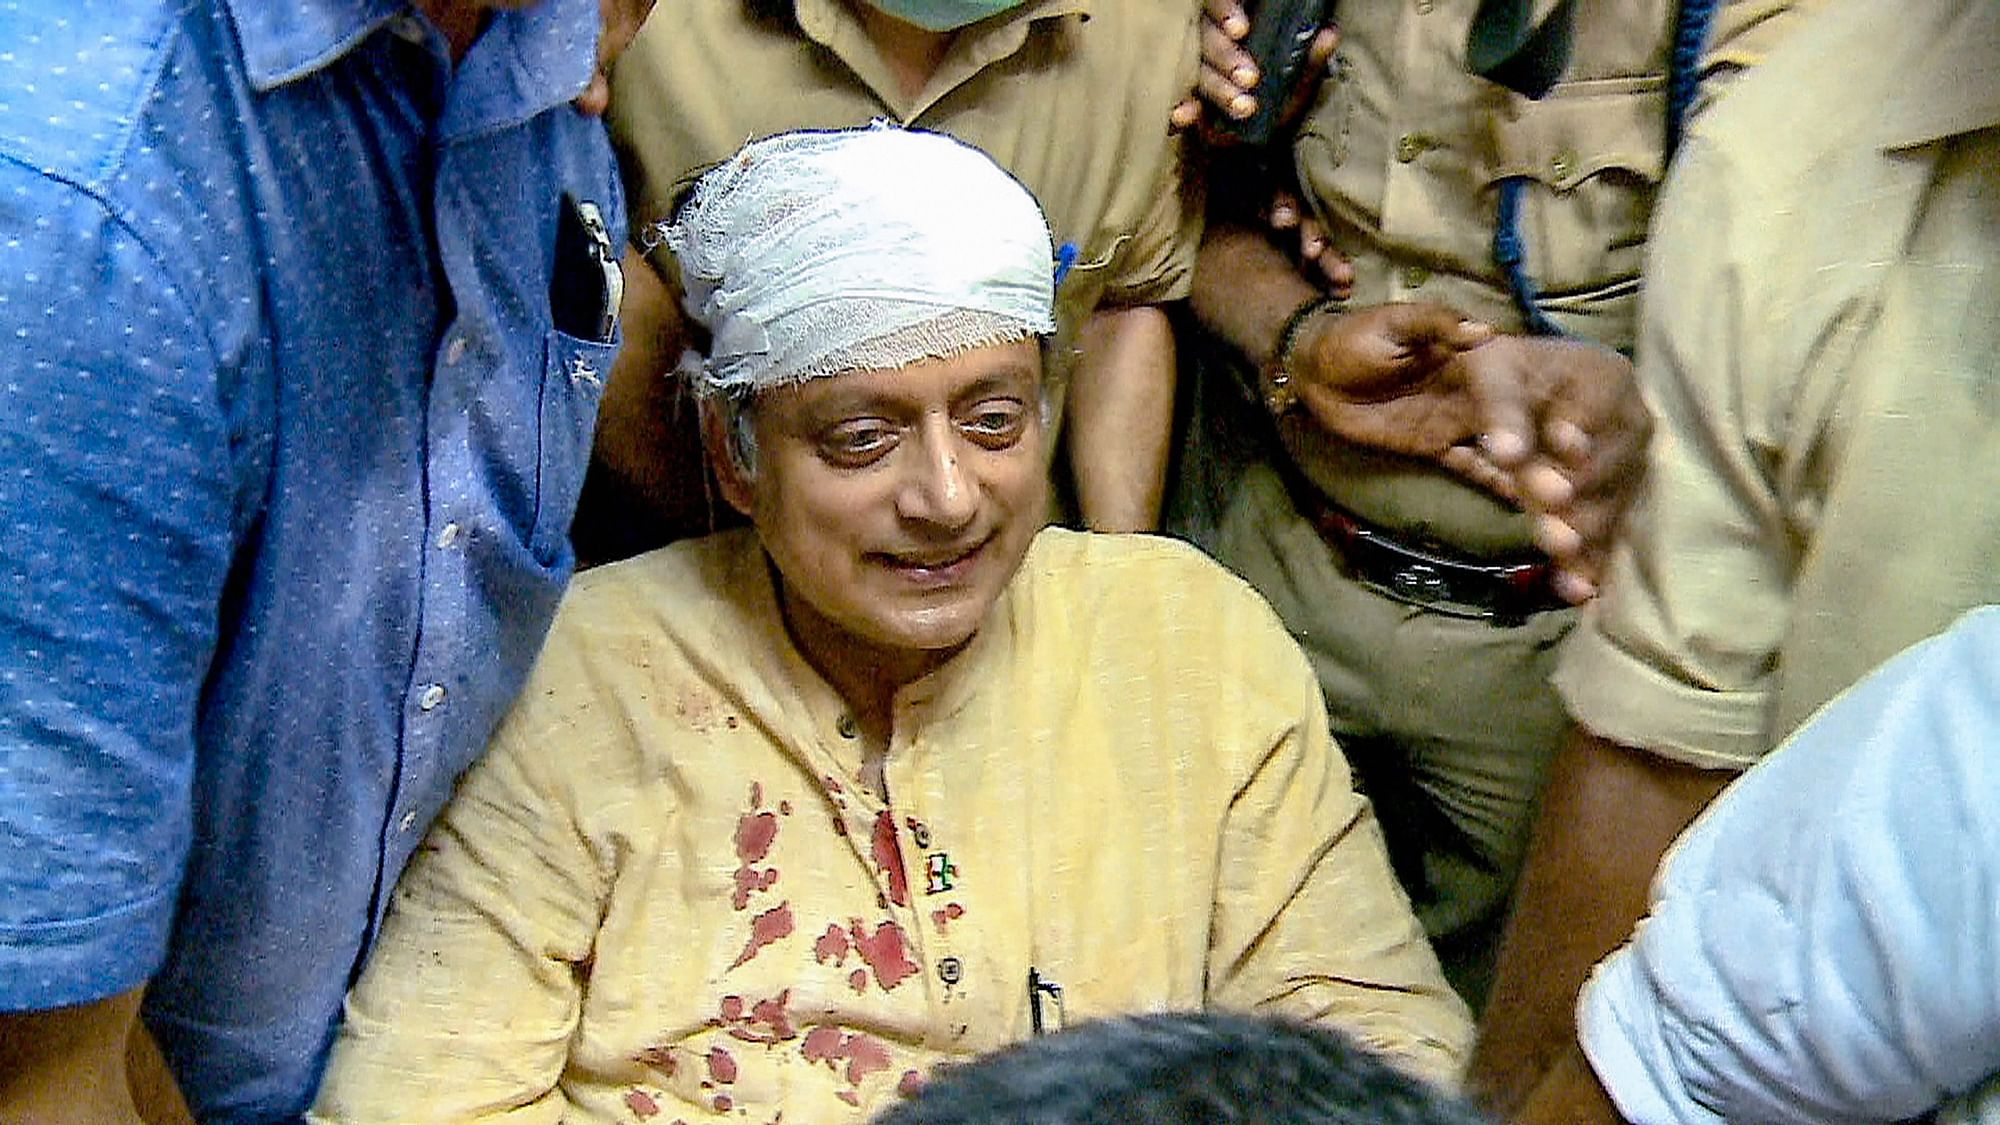 Congress leader Shashi Tharoor, who had injured himself while offering prayers at a temple in Thiruvananthapuram.